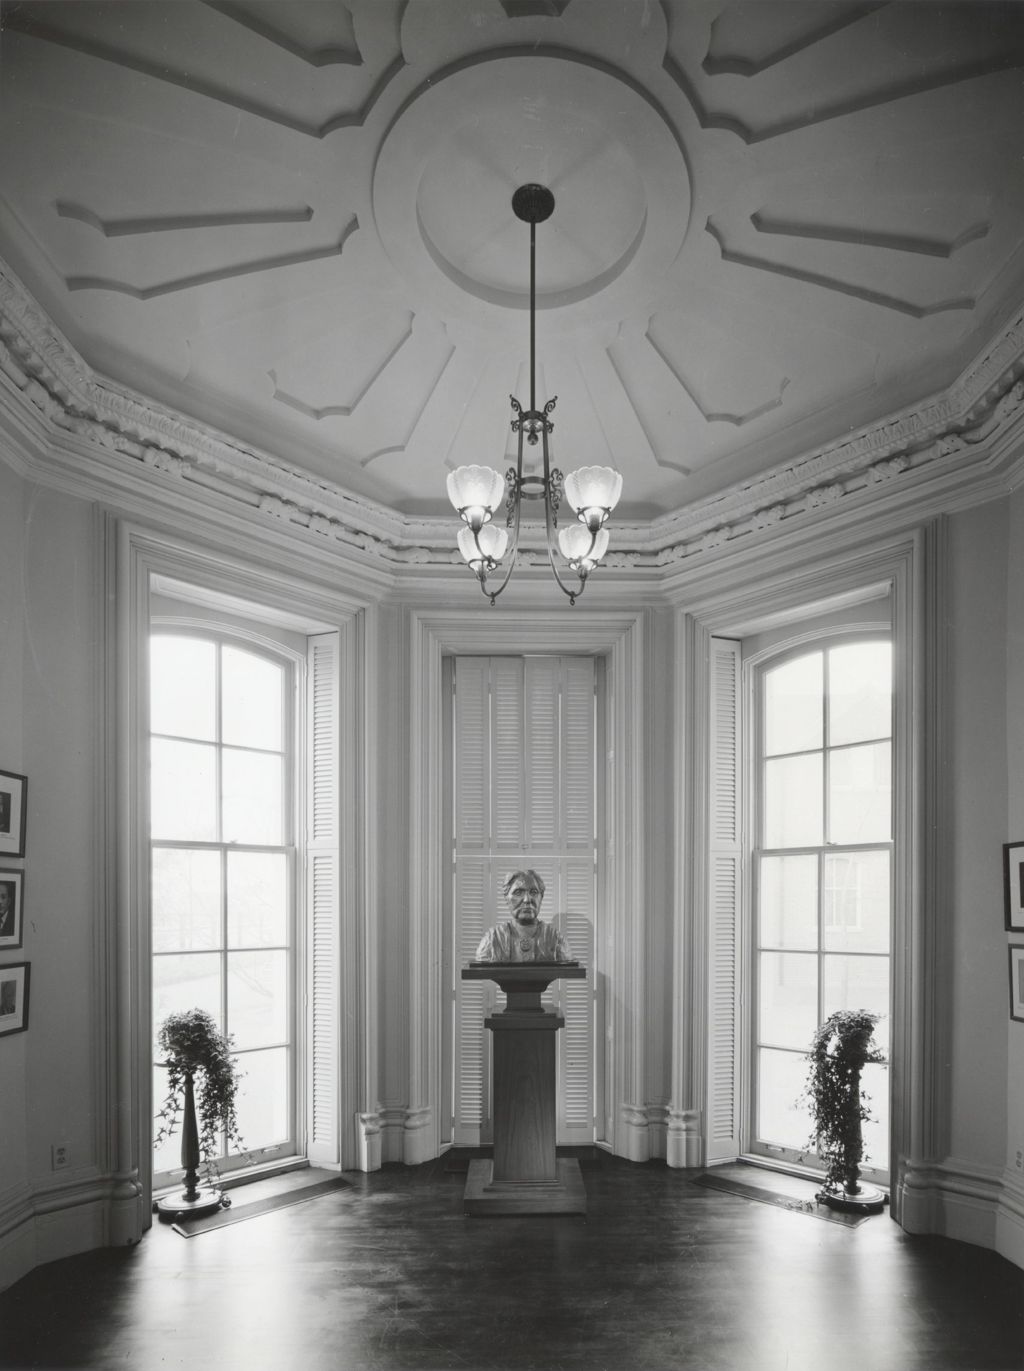 Restored Octagon Room of Hull Mansion with bust of Jane Addams, just prior to Jane Addams Hull-House Museum opening